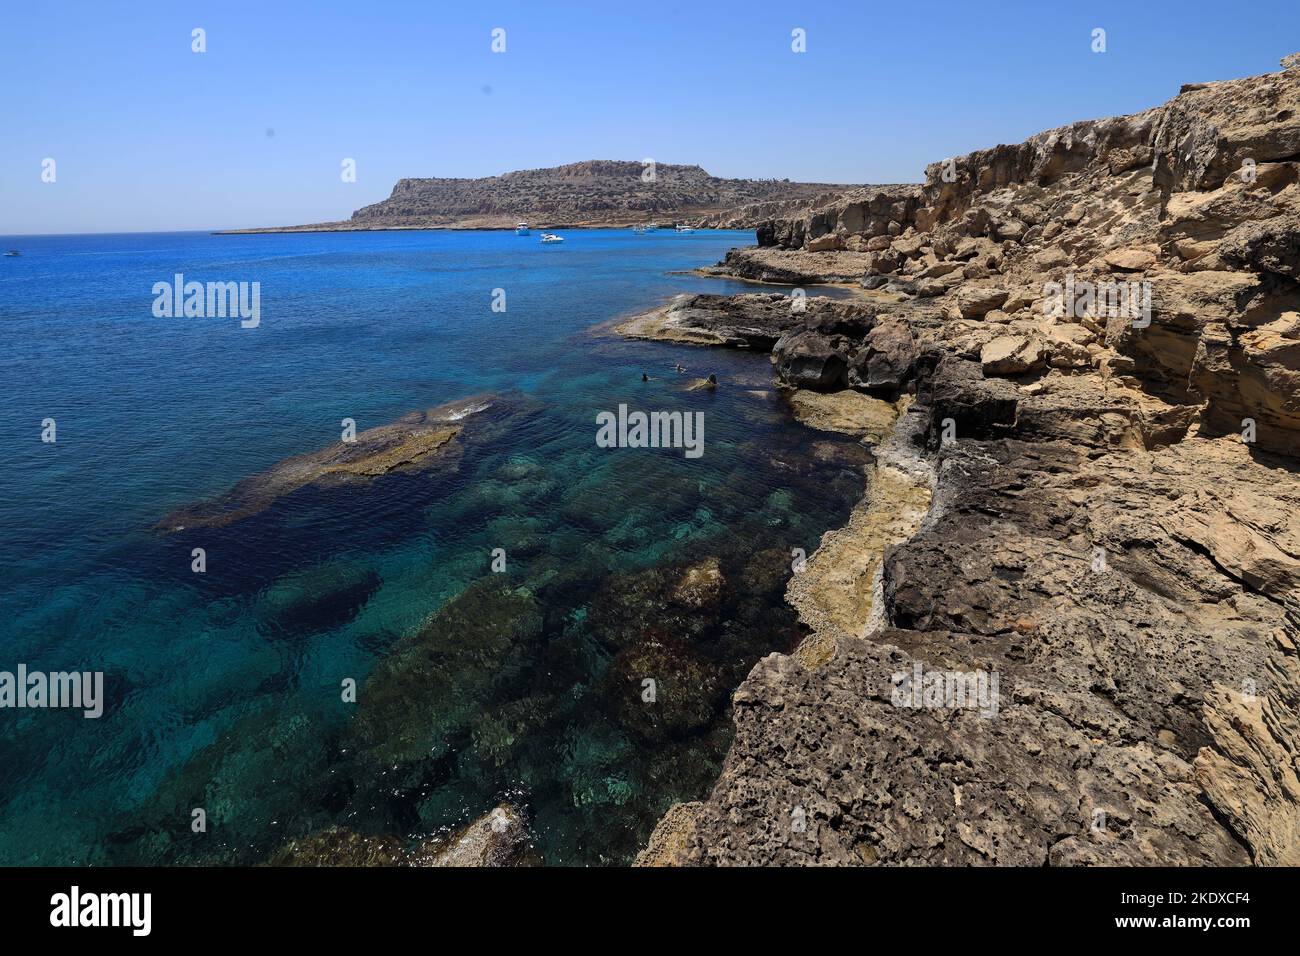 May 26, 2022, Larnaca, Cyprus: Deep blue Mediterranean Sea at Cape Greco National Forest Park at the southern end of Famagusta Bay and forms part of Ayia Napa Municipality. The Republic of Cyprus stands at a historic and cultural crossroads between Europe and Asia. Its chief cities-the capital of Nicosia, Limassol, Famagusta, and Paphos have absorbed the influences of generations of conquerors, pilgrims, and travelers and have an air that is both cosmopolitan and provincial. Today Cyprus is a popular tourist destination for visitors from Europe, favored by honeymooners (Credit Image: © Ruarid Stock Photo